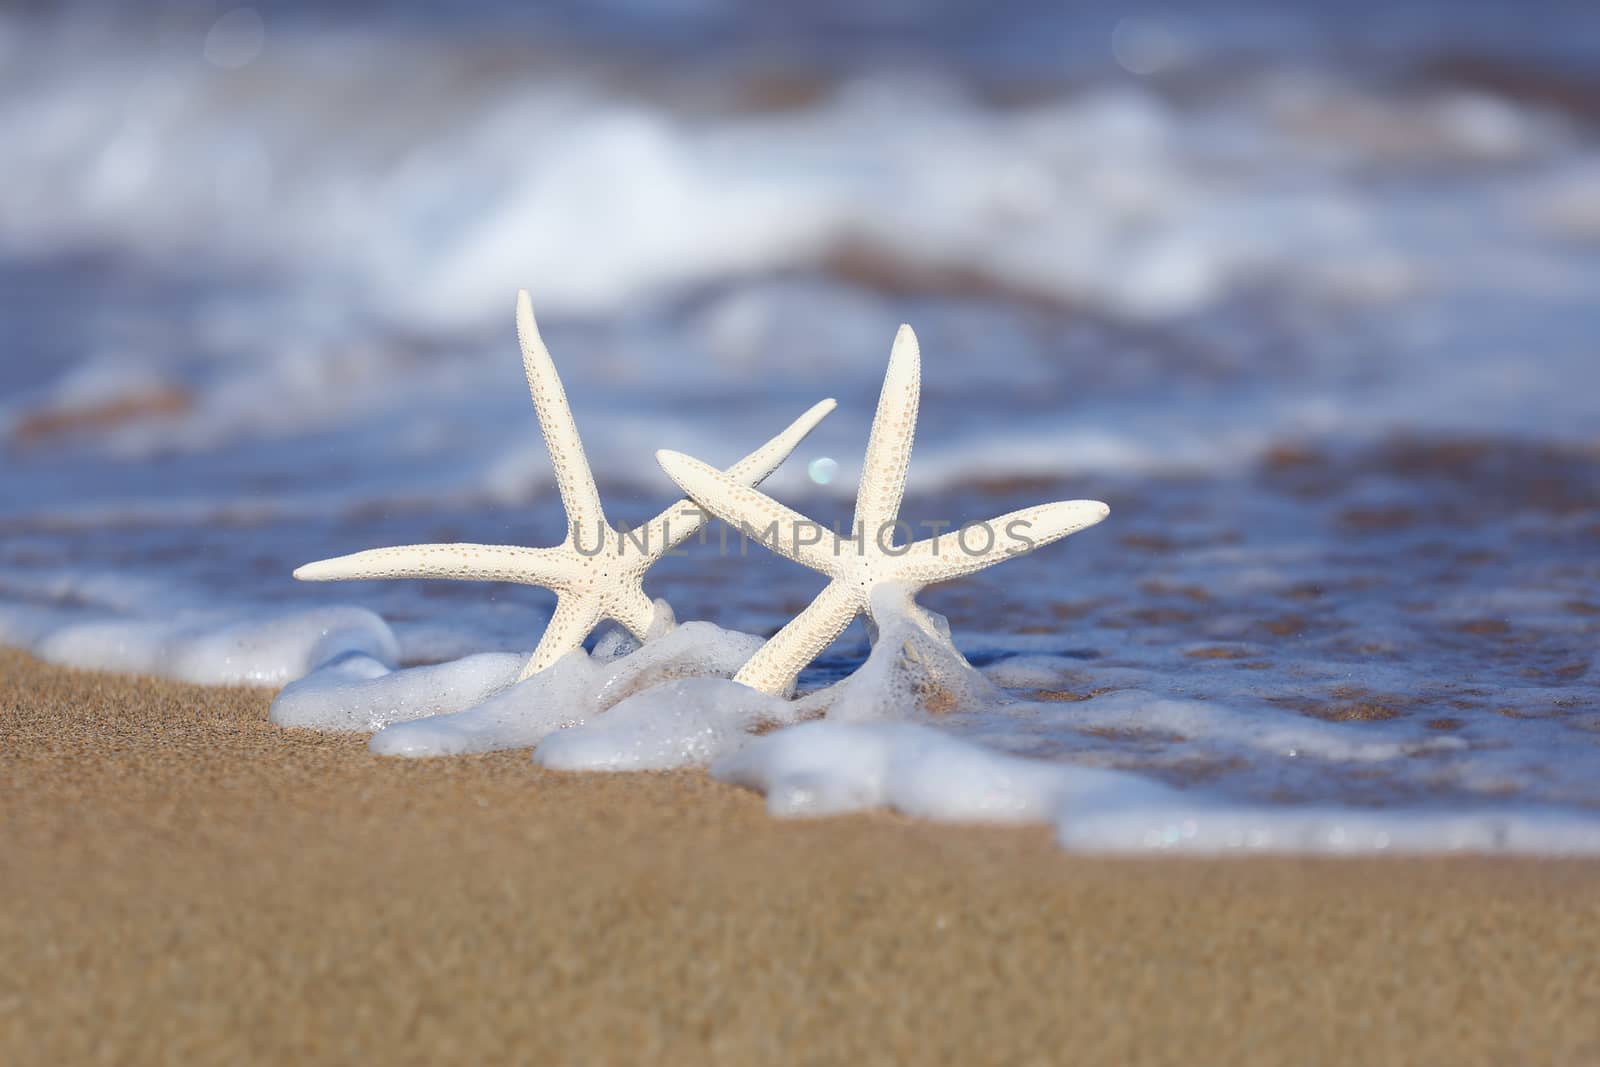 Two Starfish in the Sand With Seafoam Waves